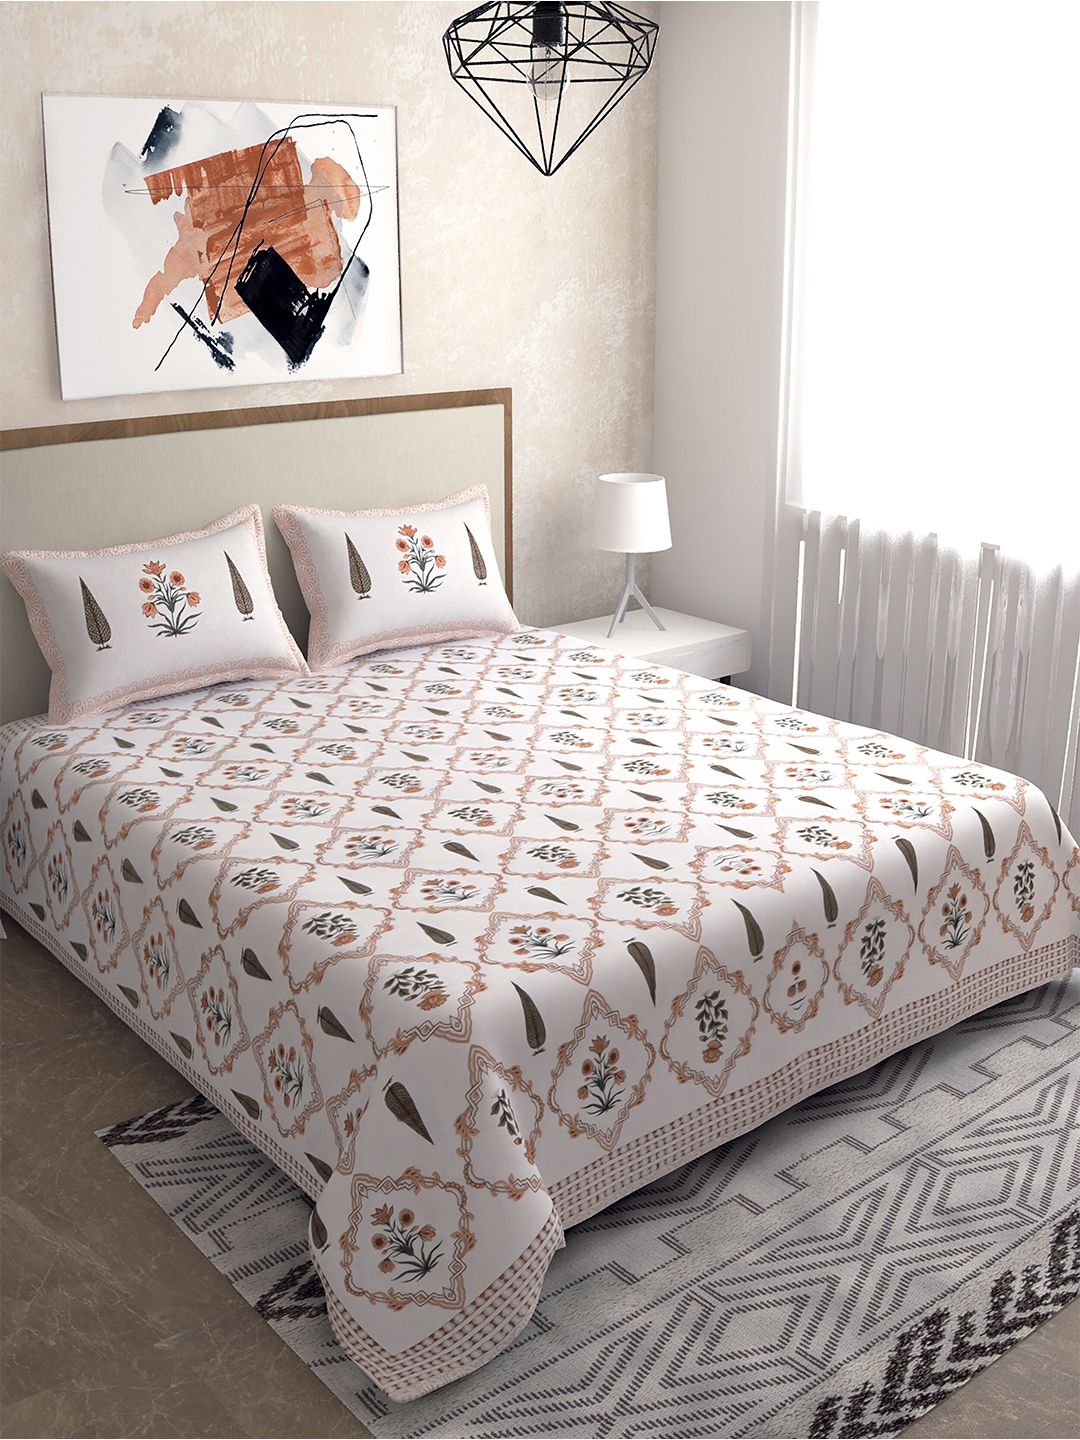 Salona Bichona Peach-Coloured & White Ethnic Motifs 120 TC King Bedsheet with 2 Pillow Covers Price in India